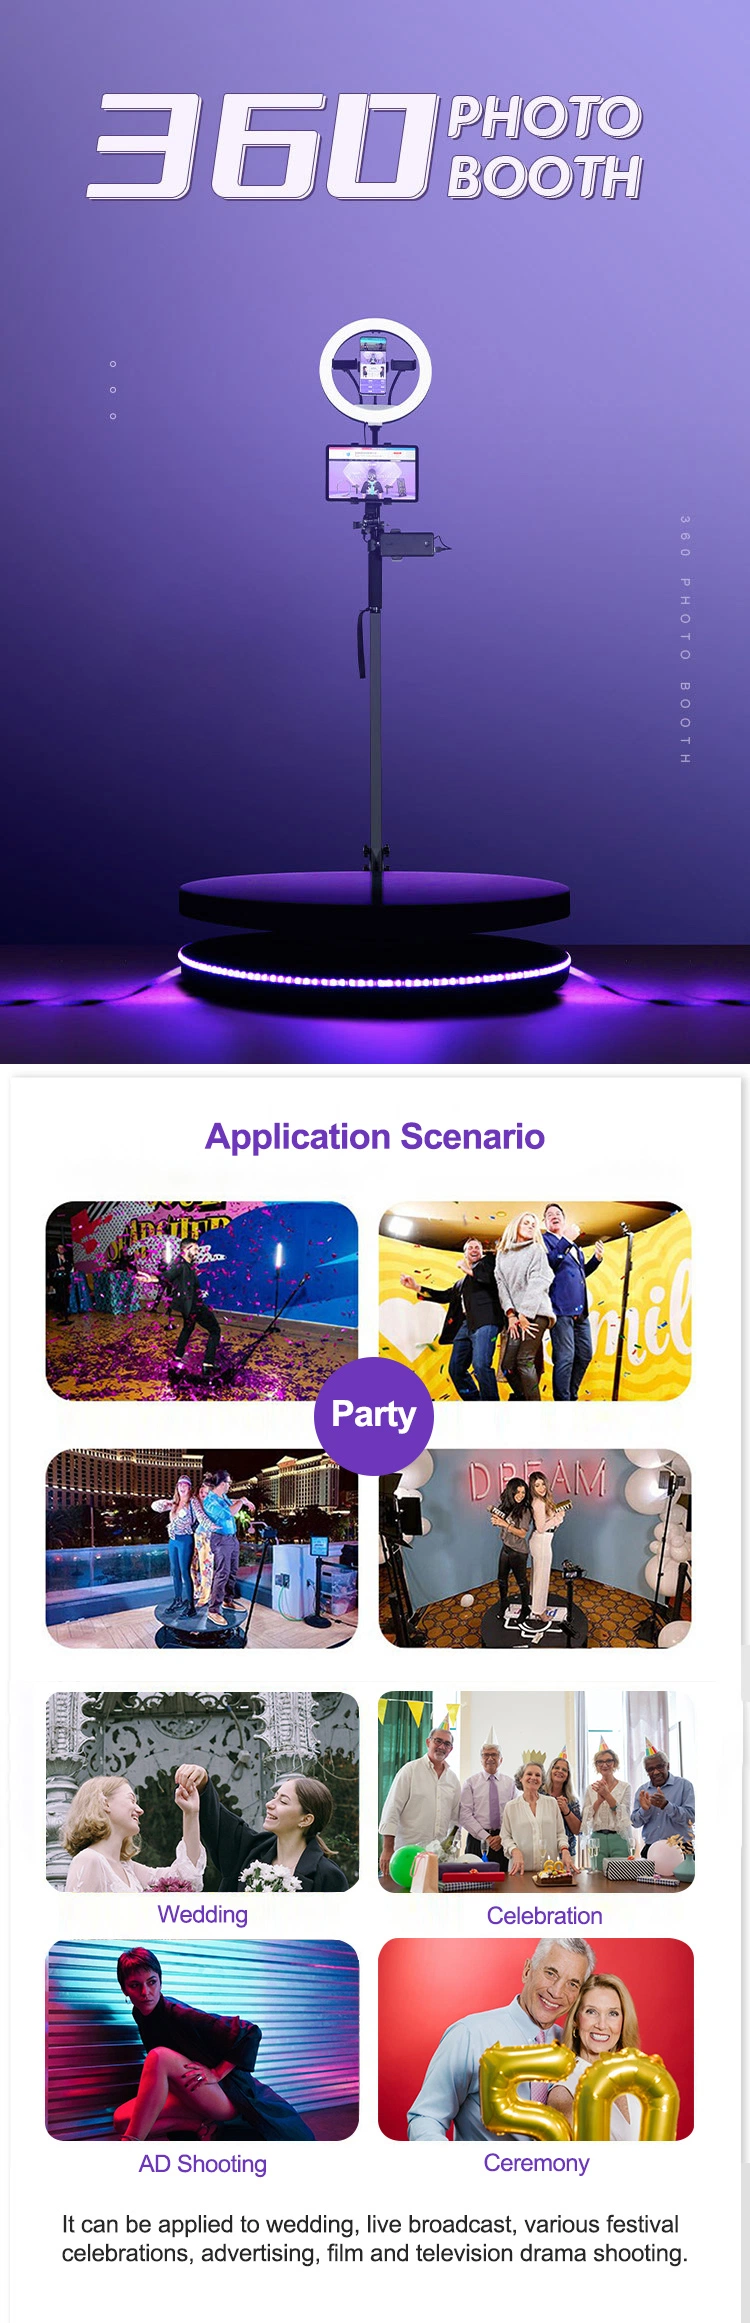 2022 Hot Sale 360 Photo Booth Magic Spin Rotating Slow Motion Portable 360 Photo Degree Video Booth for Party